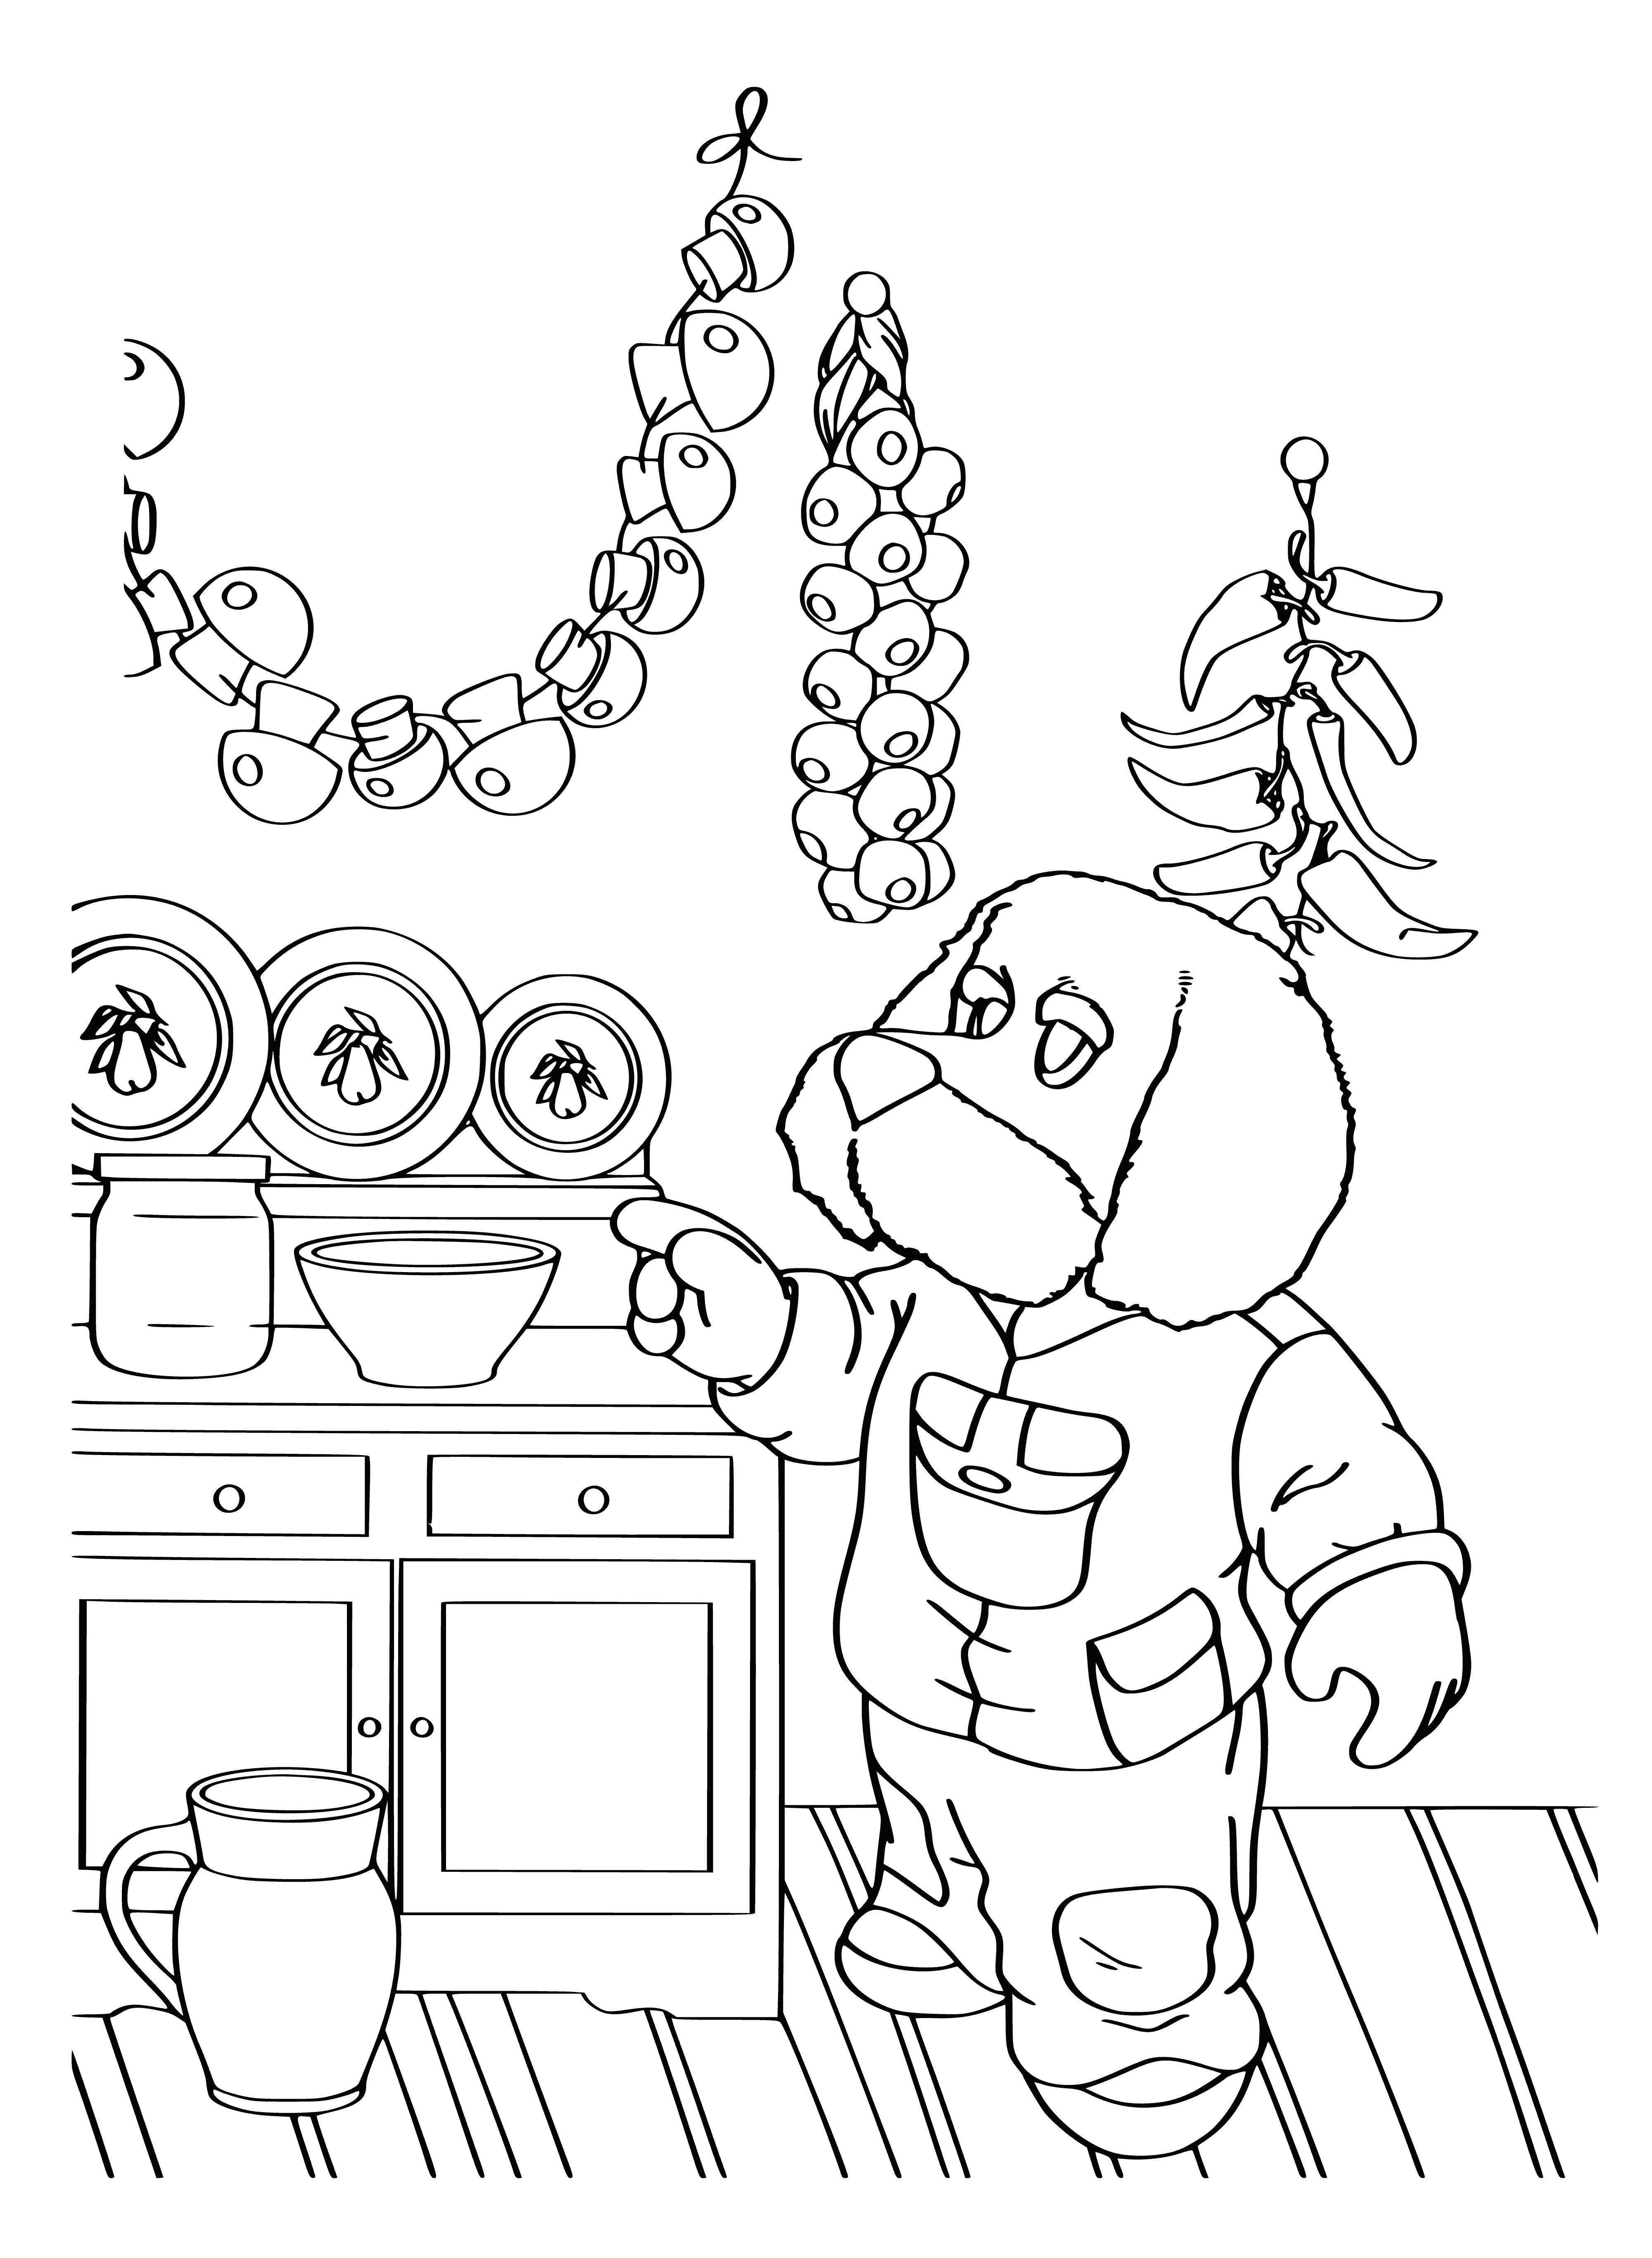 coloring page: Filya says goodnight to her sleeping kids; a warm glow from the fireplace illuminates the room in peace.